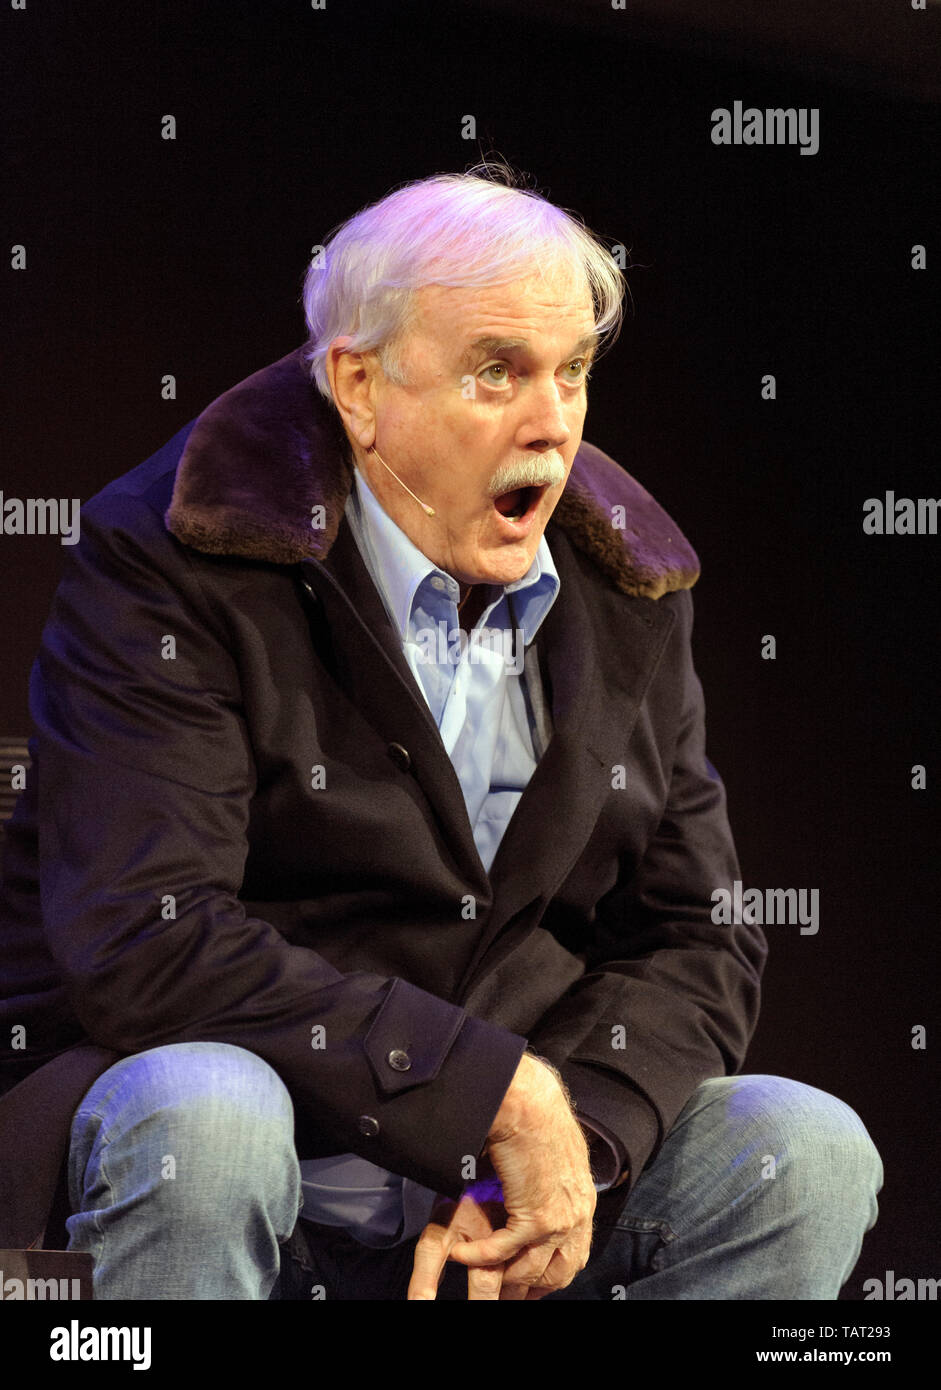 English actor, comedian, writer and film producer John Cleese at the Cheltenham Literature Festival, October 11, 2014. Stock Photo